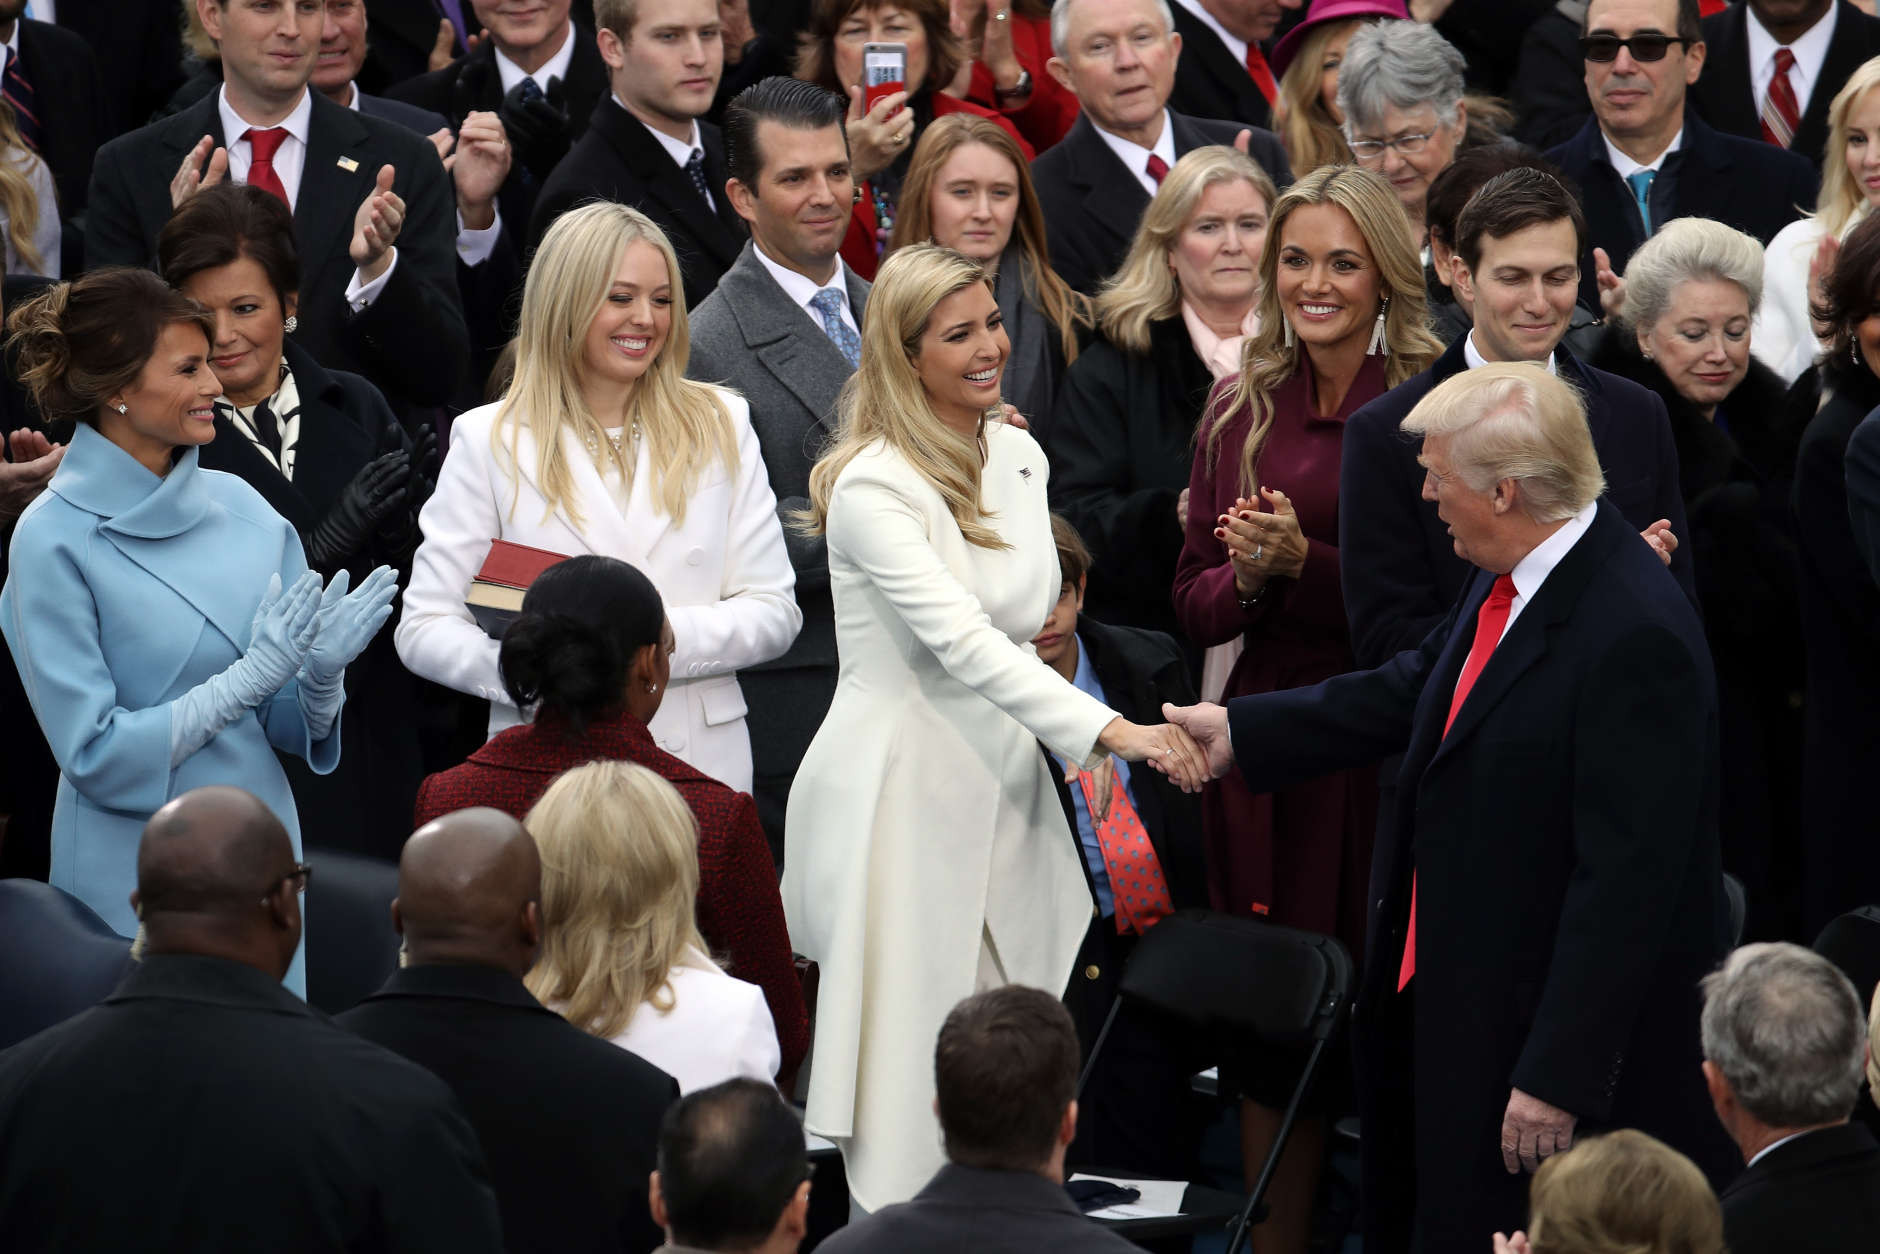 WASHINGTON, DC - JANUARY 20:  U.S. President-elect Donald Trump (R) is greeted by (L-R) wife Melania Trump, and daughters Tiffany Trump and Ivanka Trump on the West Front of the U.S. Capitol on January 20, 2017 in Washington, DC. In today's inauguration ceremony Donald J. Trump becomes the 45th president of the United States.  (Photo by Drew Angerer/Getty Images)